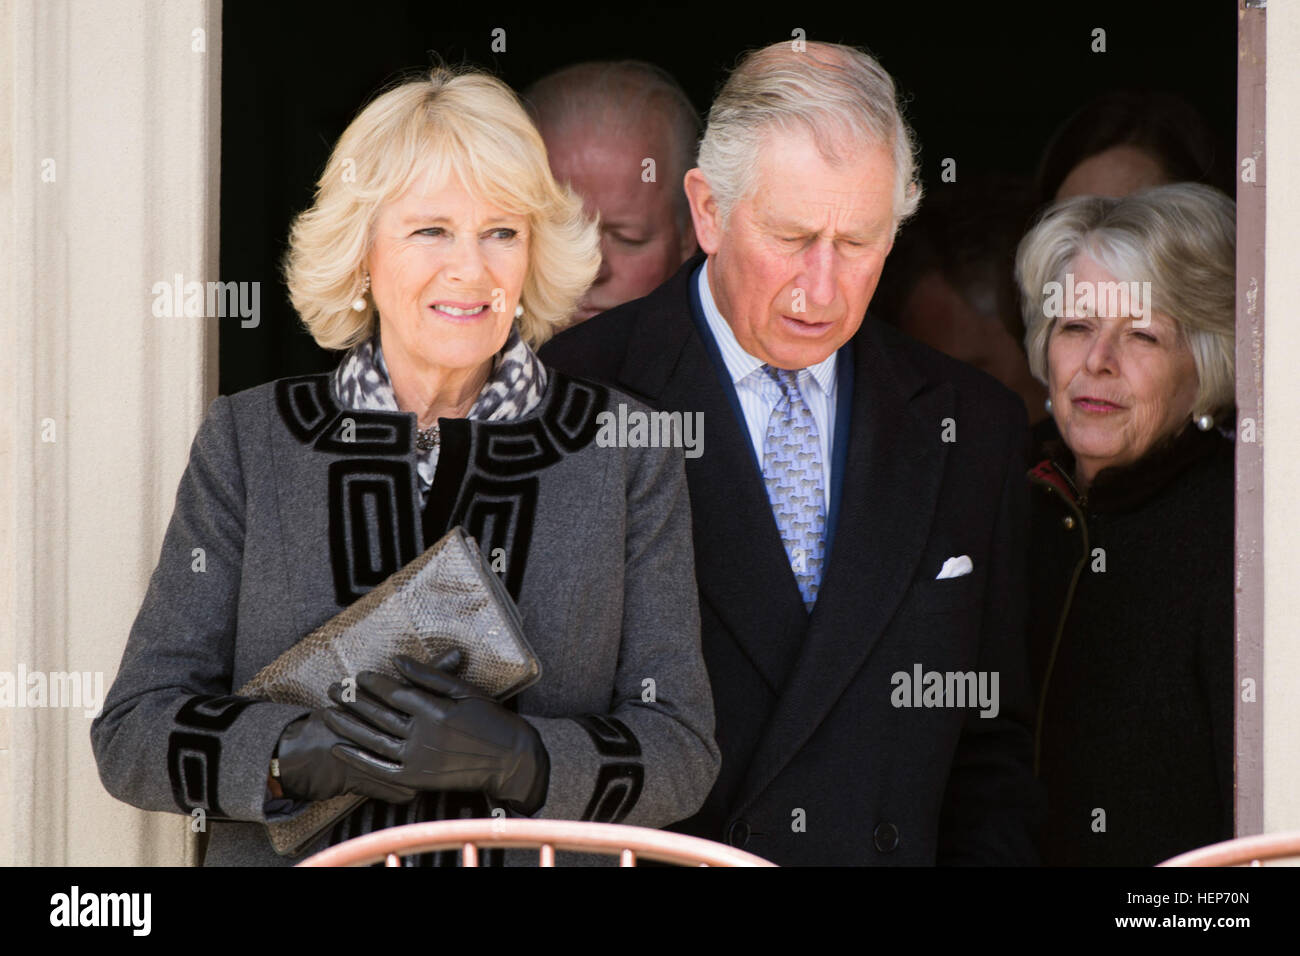 His Royal Highness, Prince Charles, right, and Duchess of Cornwall, Camilla, step out of George Washington’s mansion at Mount Vernon, Va., toward the Potomac River during their visit to Washington, March 18, 2015. Prince Charles previously visited Mount Vernon in 1970 with his sister Princess Anne, and two of U.S. President Richard Nixon’s daughters. (Joint Base Myer-Henderson Hall PAO photo by Rachel Larue) Retirement absolutely royal for former TOG Fife and Drum Corps fifer 150316-A-DZ999-179 Stock Photo